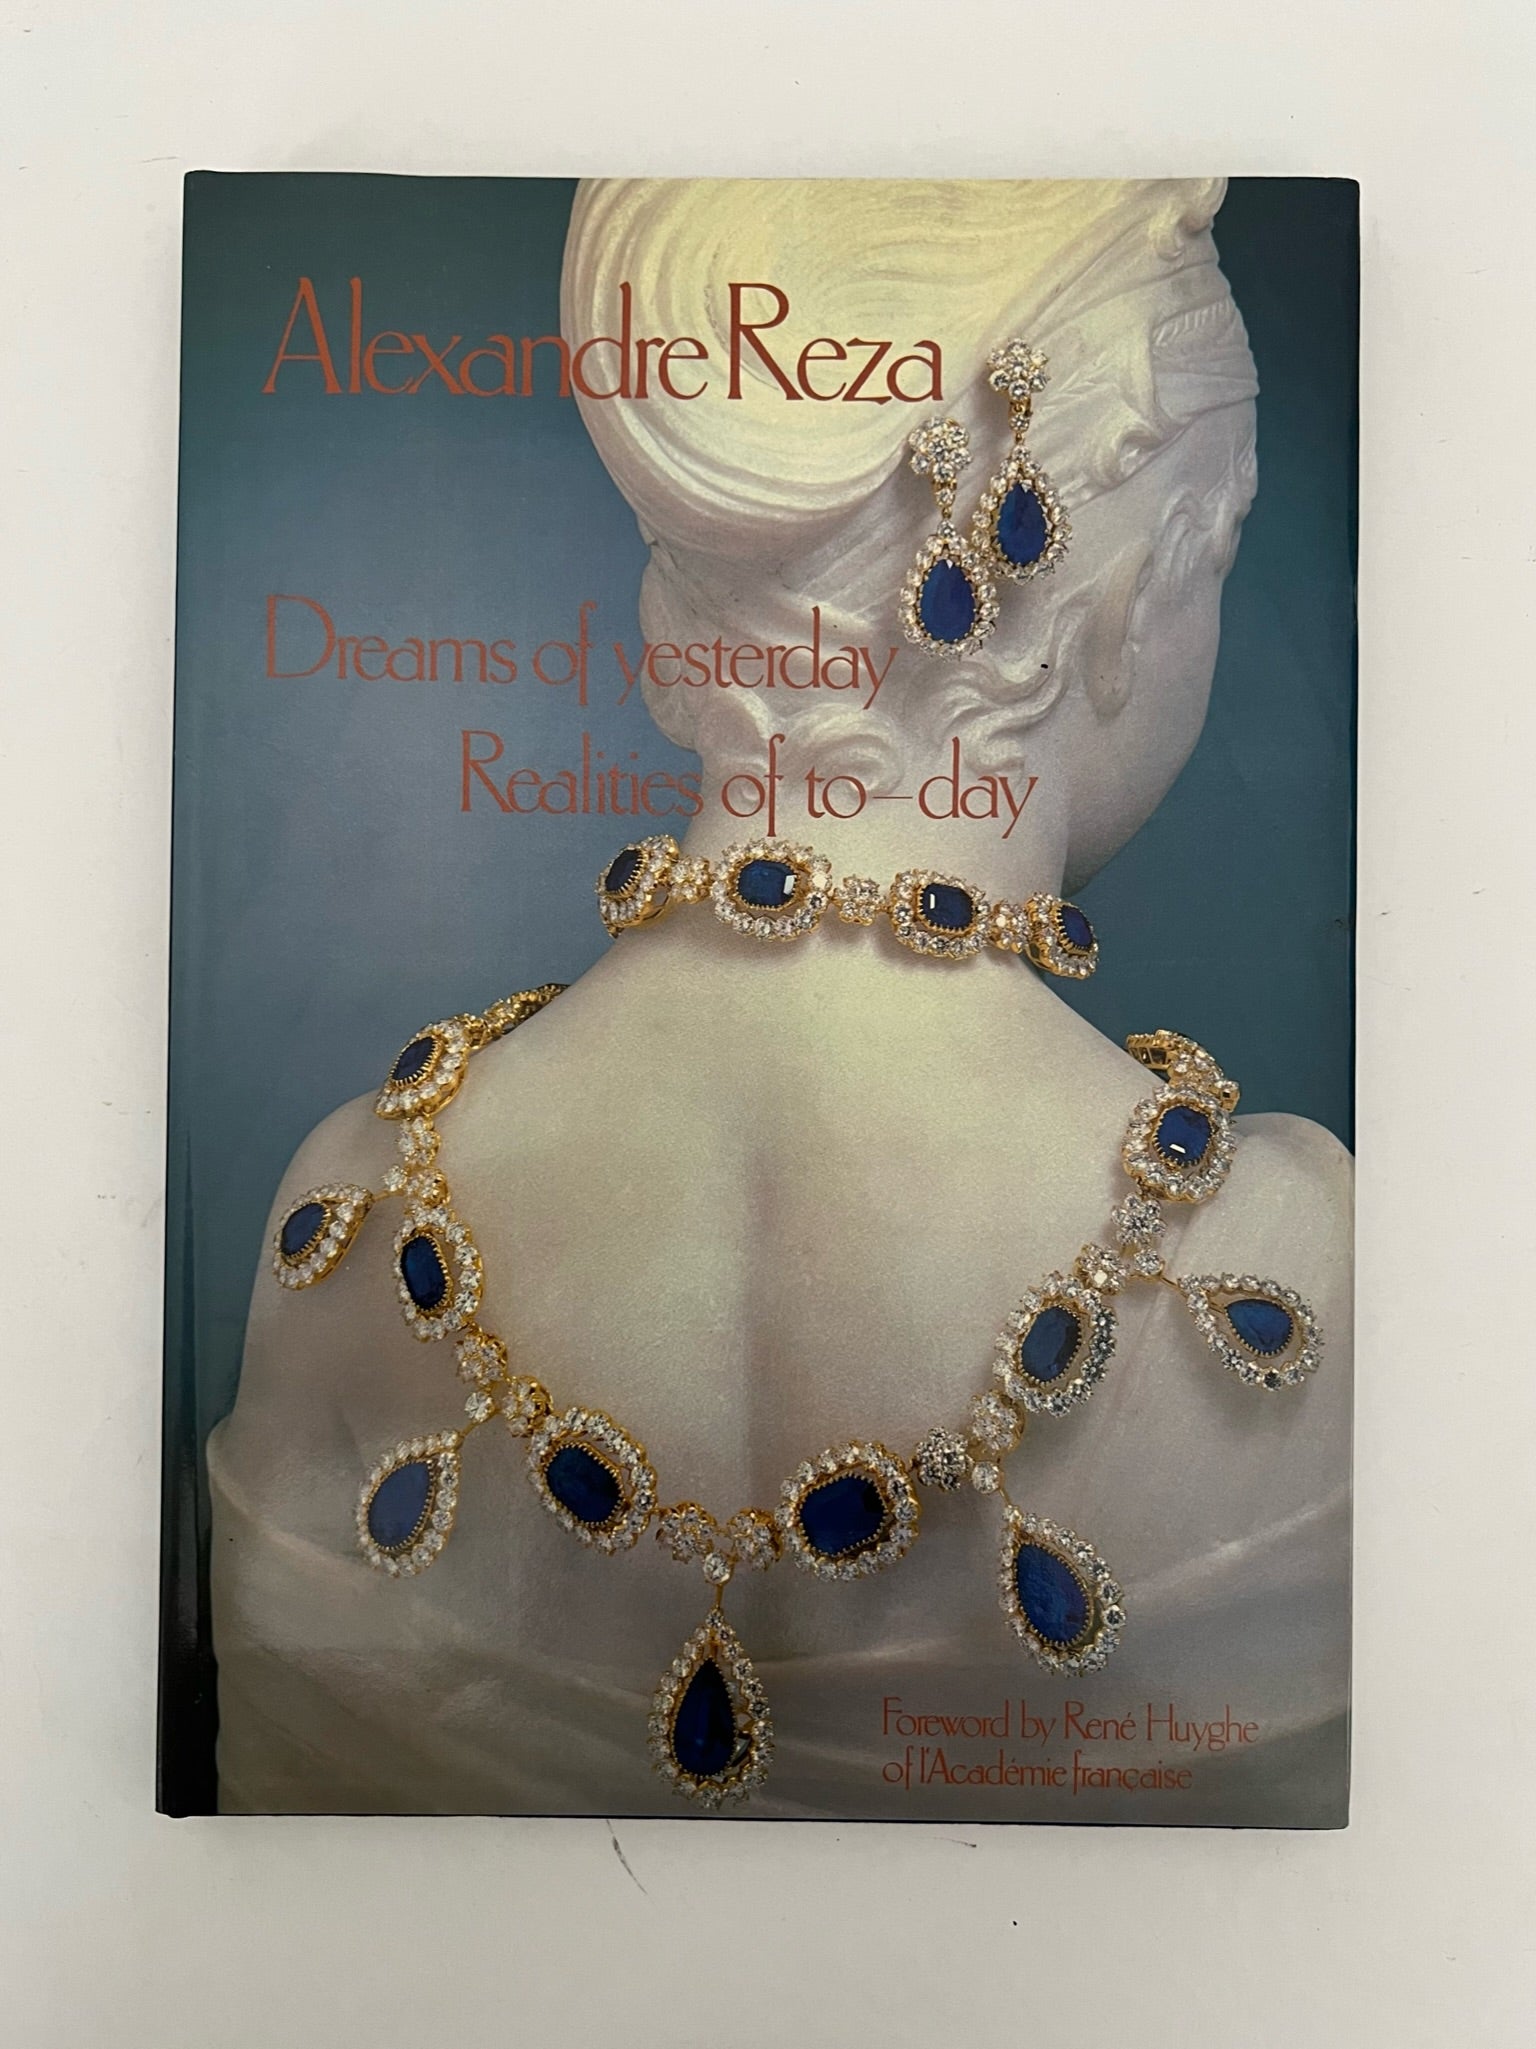 Alexandre Reza Dreams of Yesterday Realities of To-Day Book by Arlette Seta 1985 For Sale